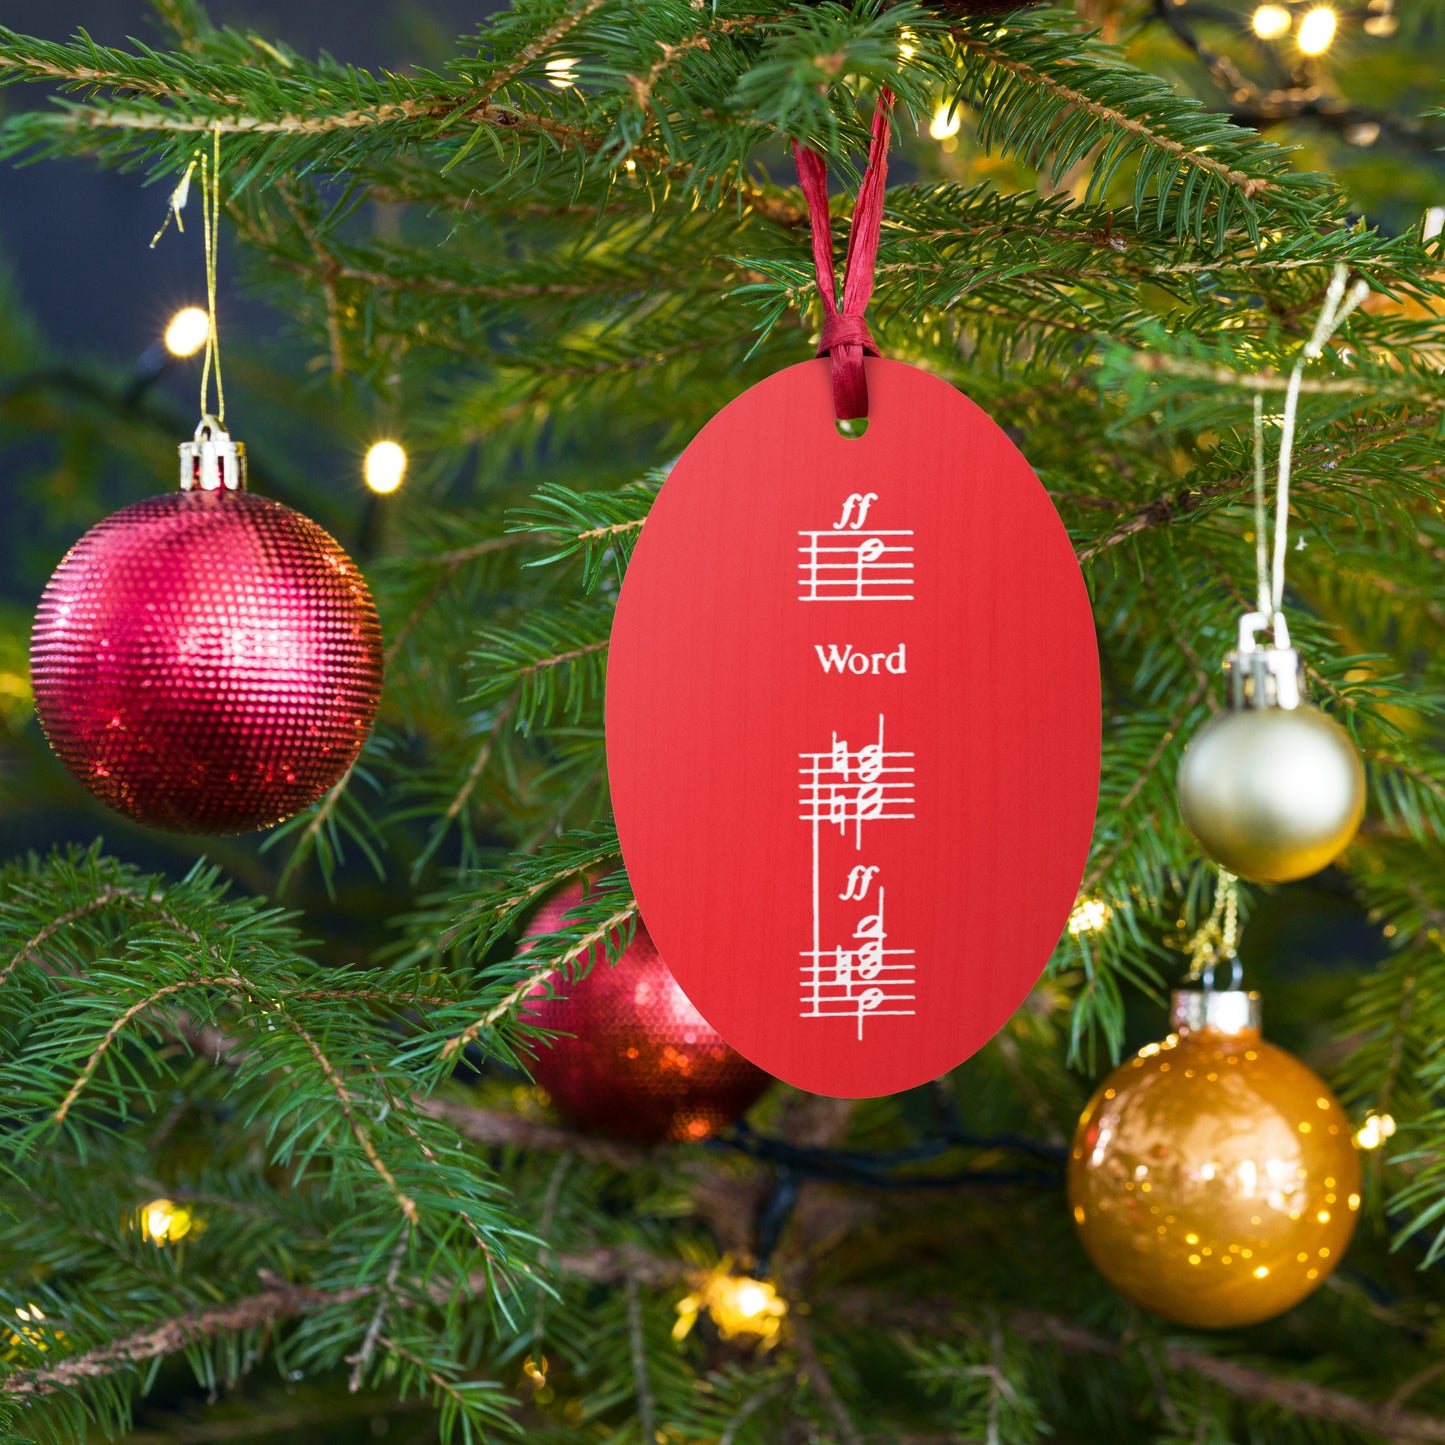 Word - Christmas Wooden Ornaments